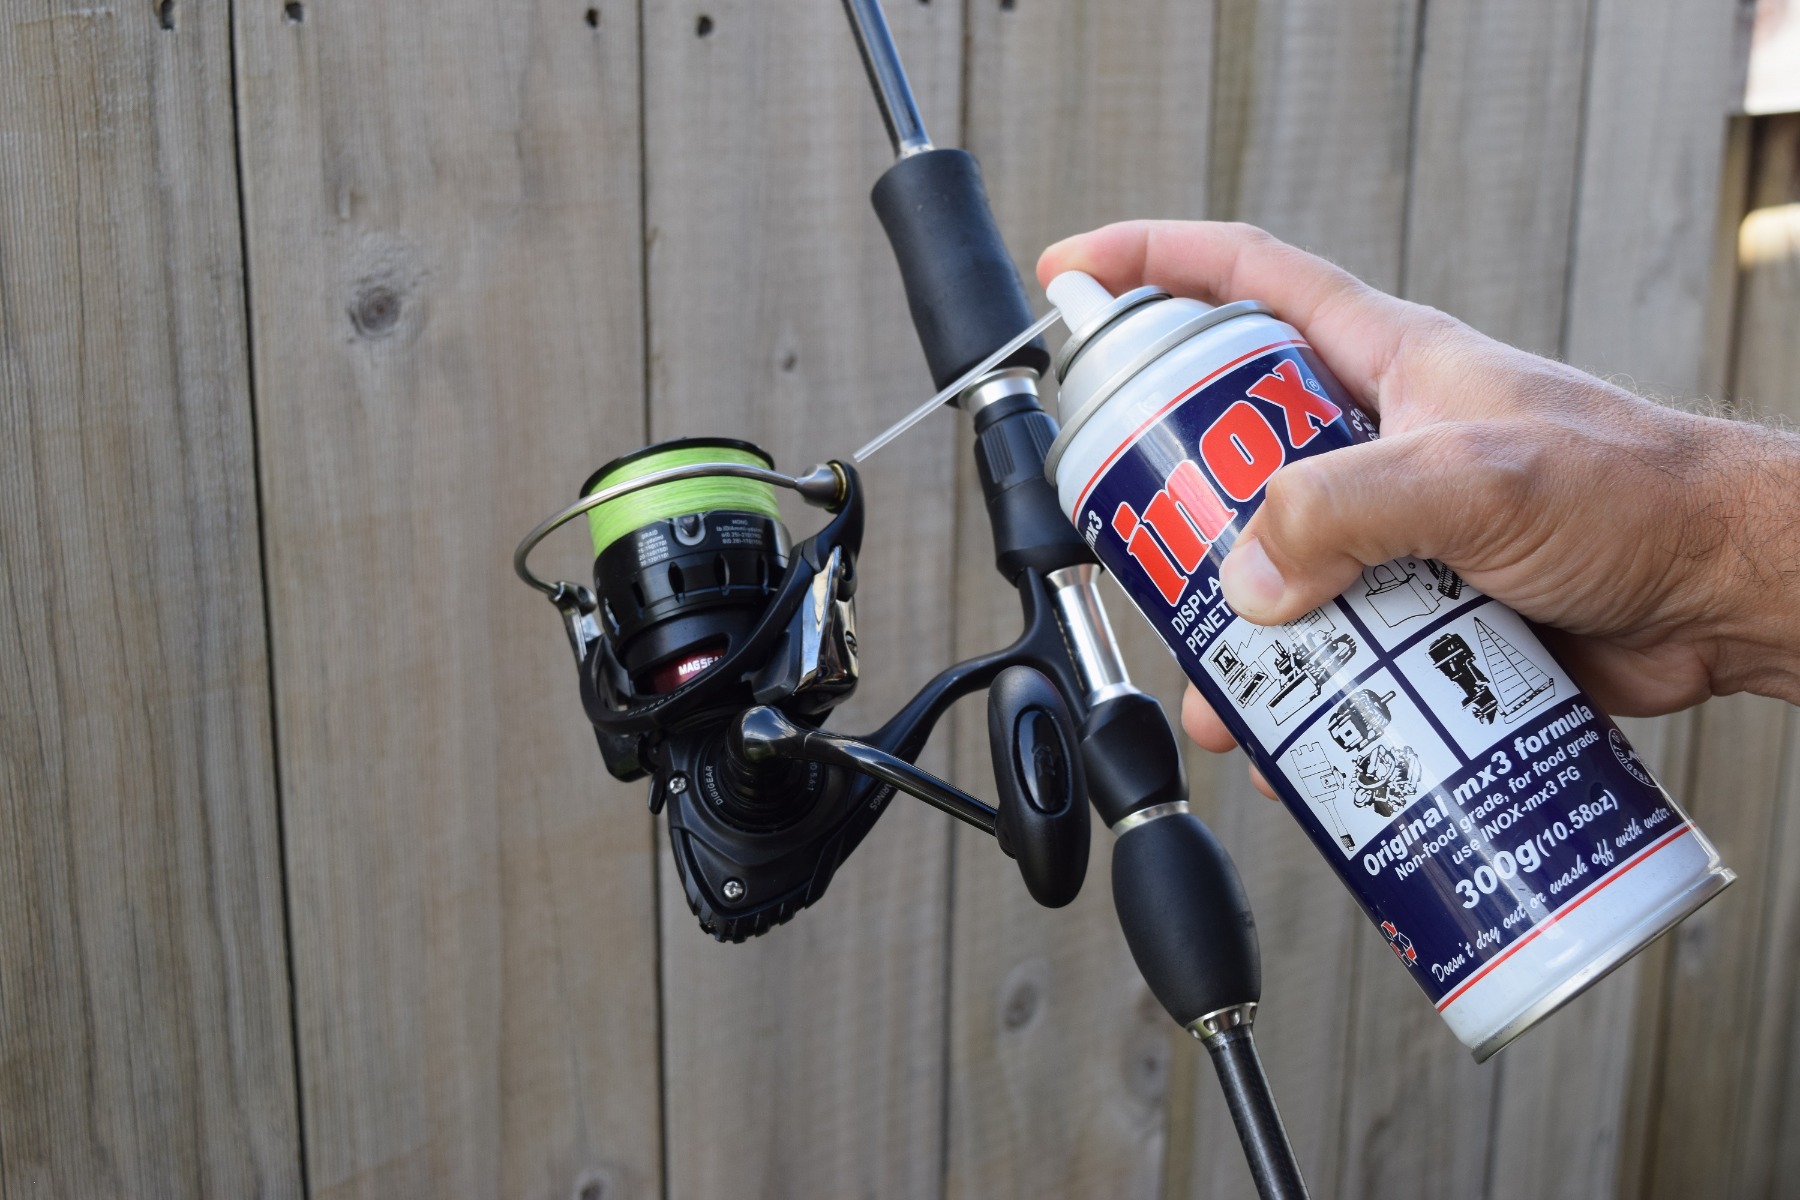 Fishing Gear Maintenance - Learn How to Get Your Gear Ready